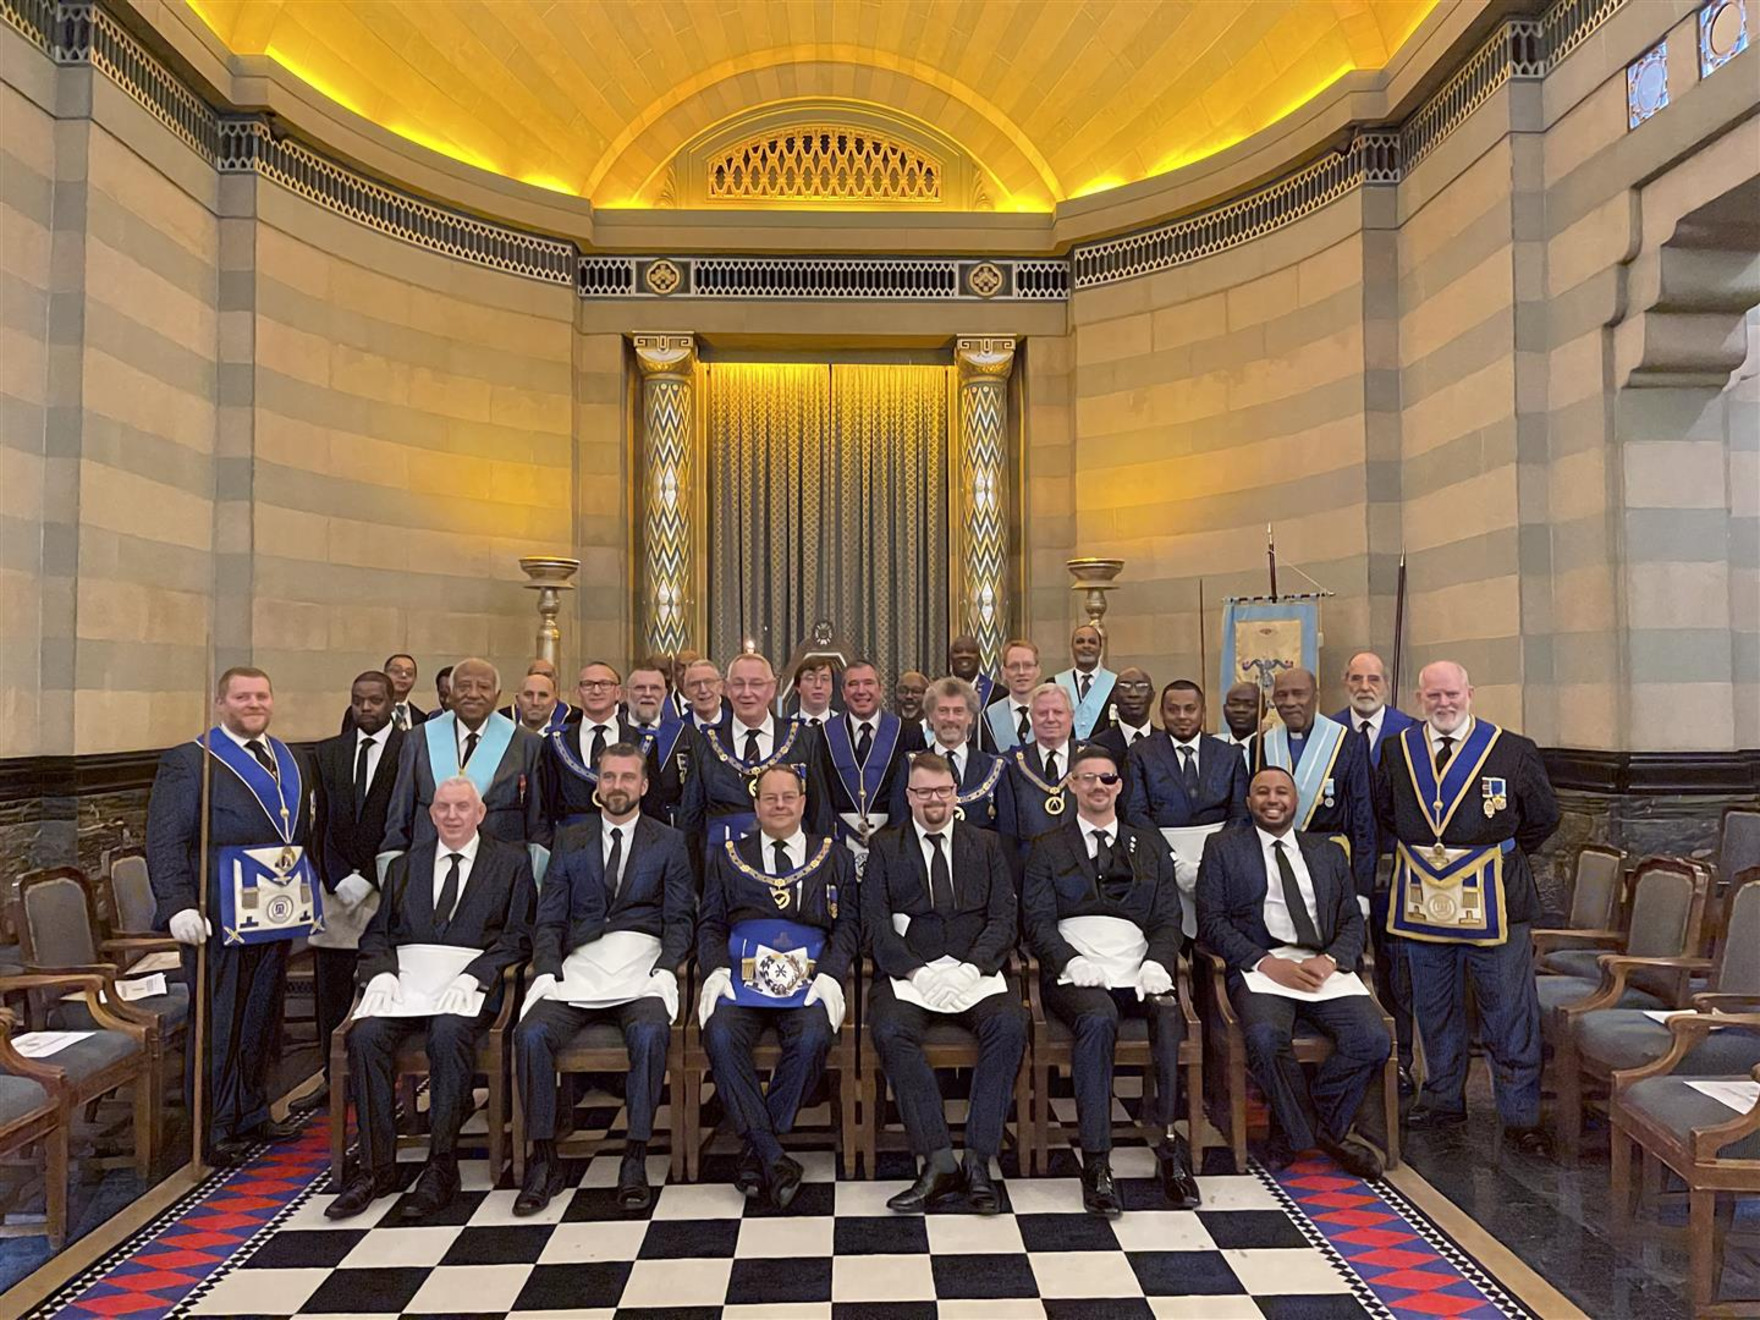 Welcome Aboard London Craft and Royal Arch Freemasonry